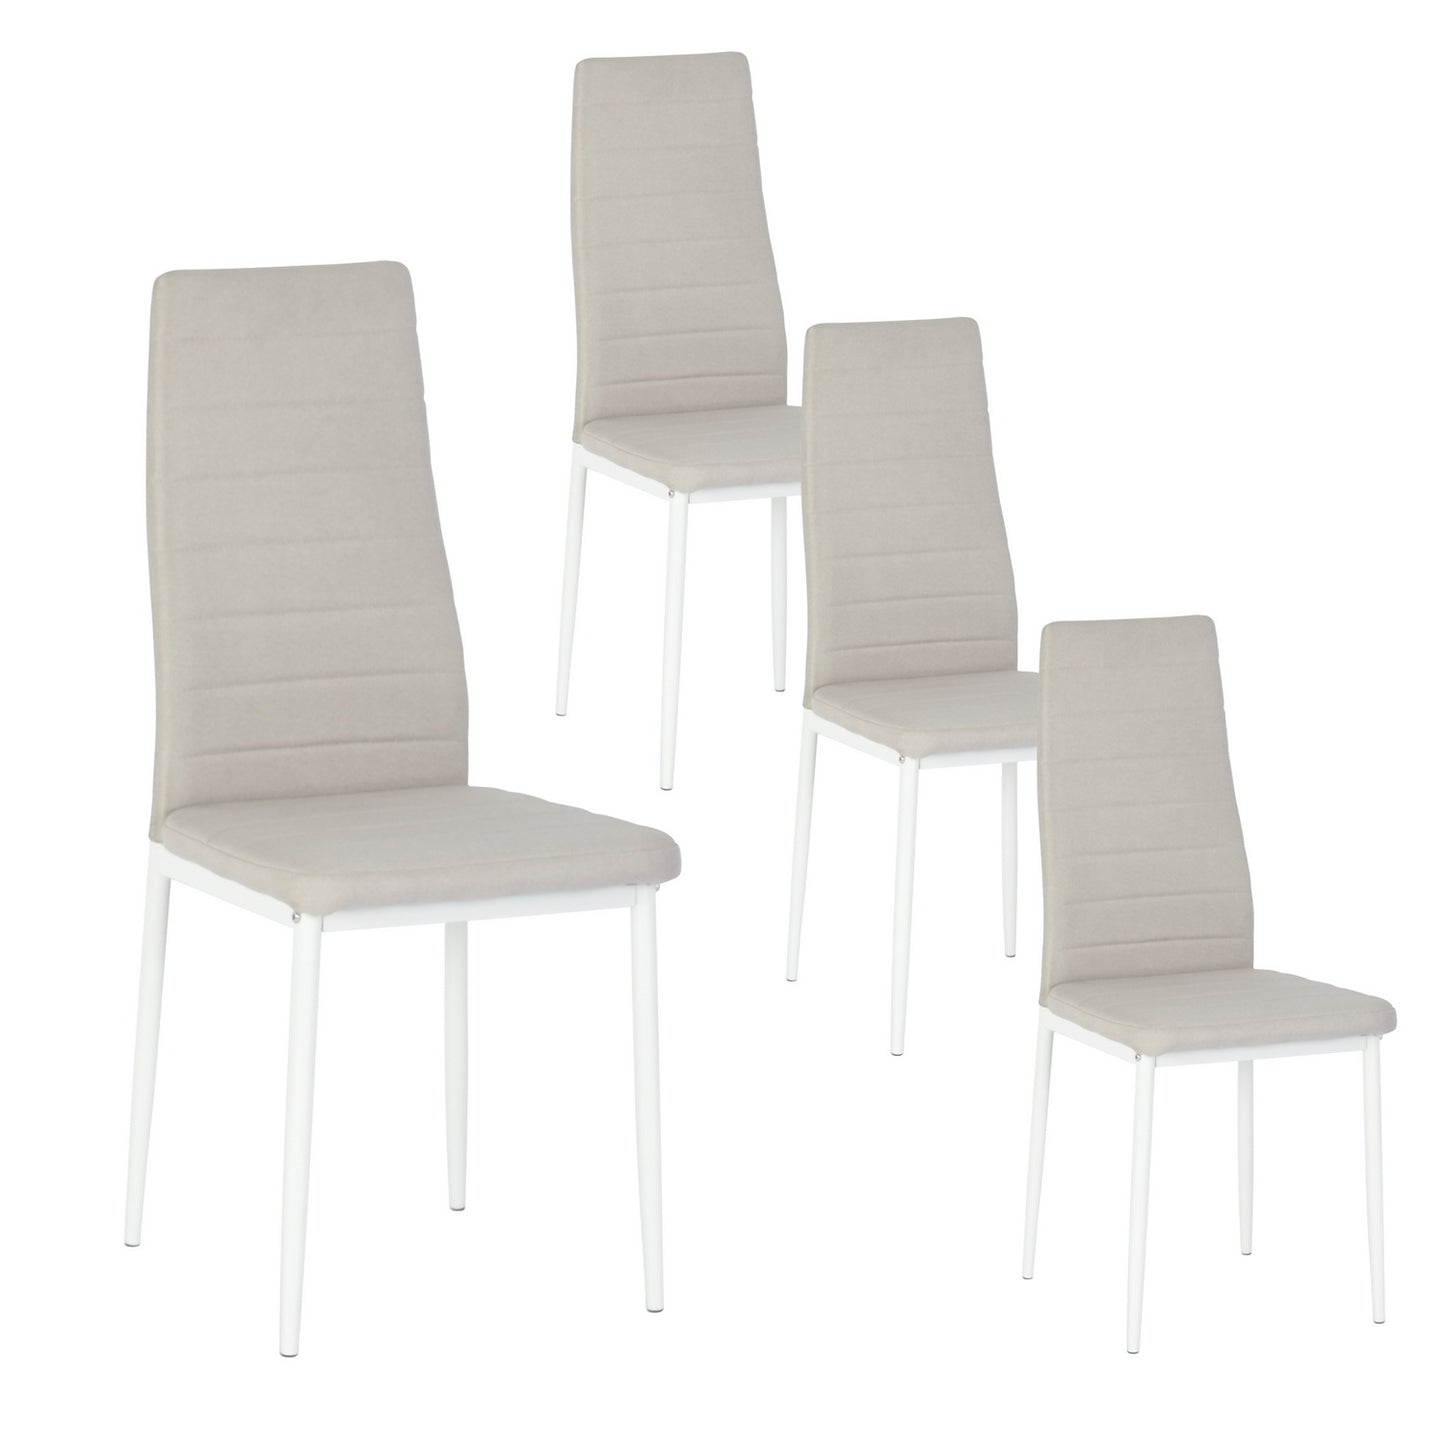 ANN Fabric Upholstered Side Chairs (Set of 4)